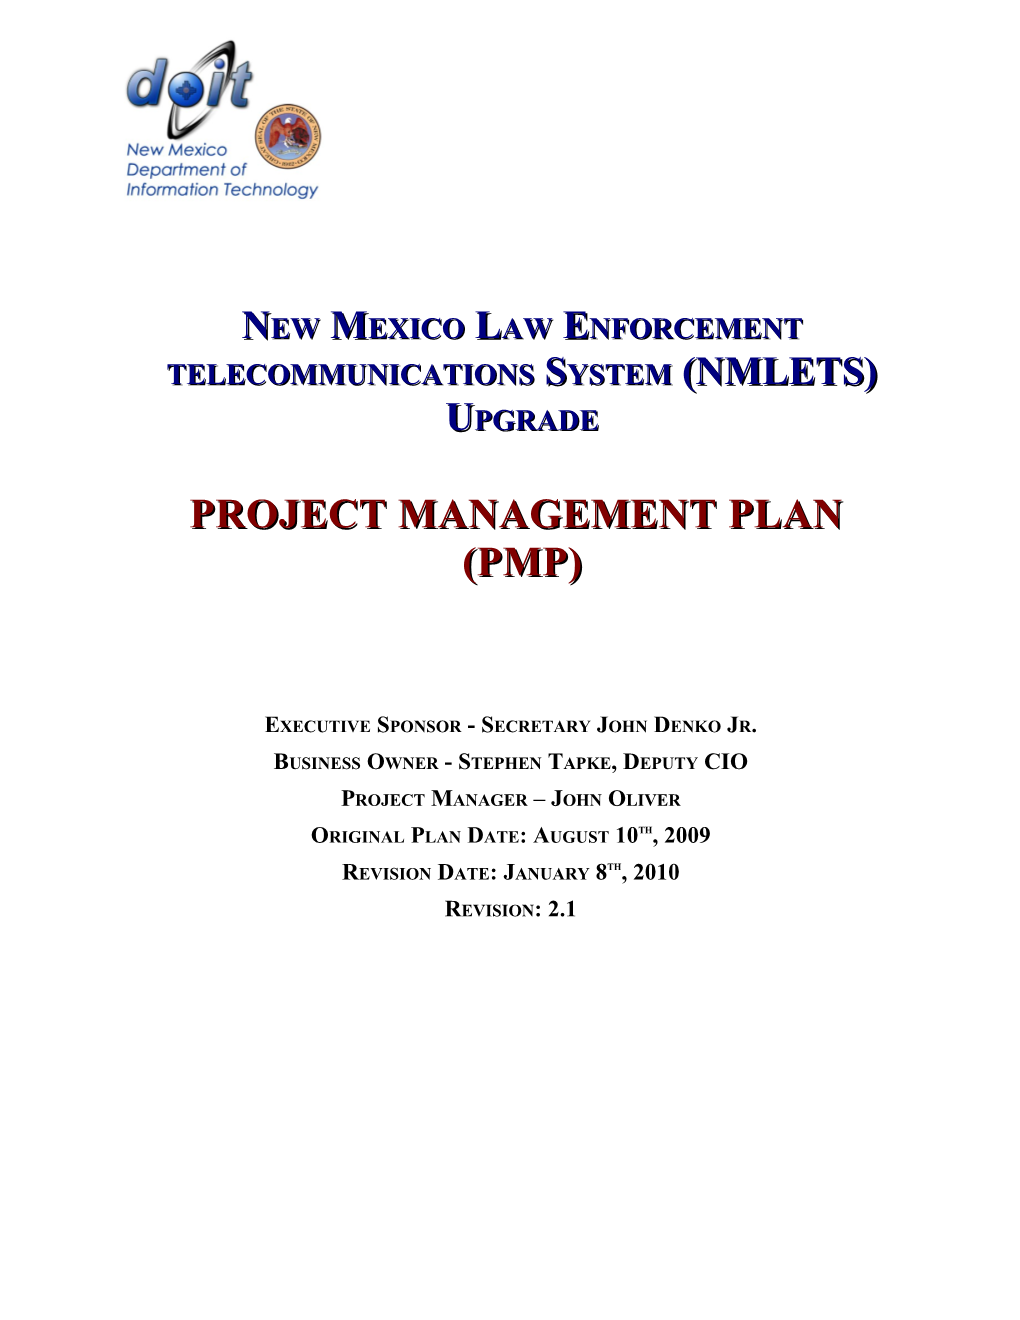 New Mexico Law Enforcement Telecommunications System (NMLETS) Upgrade